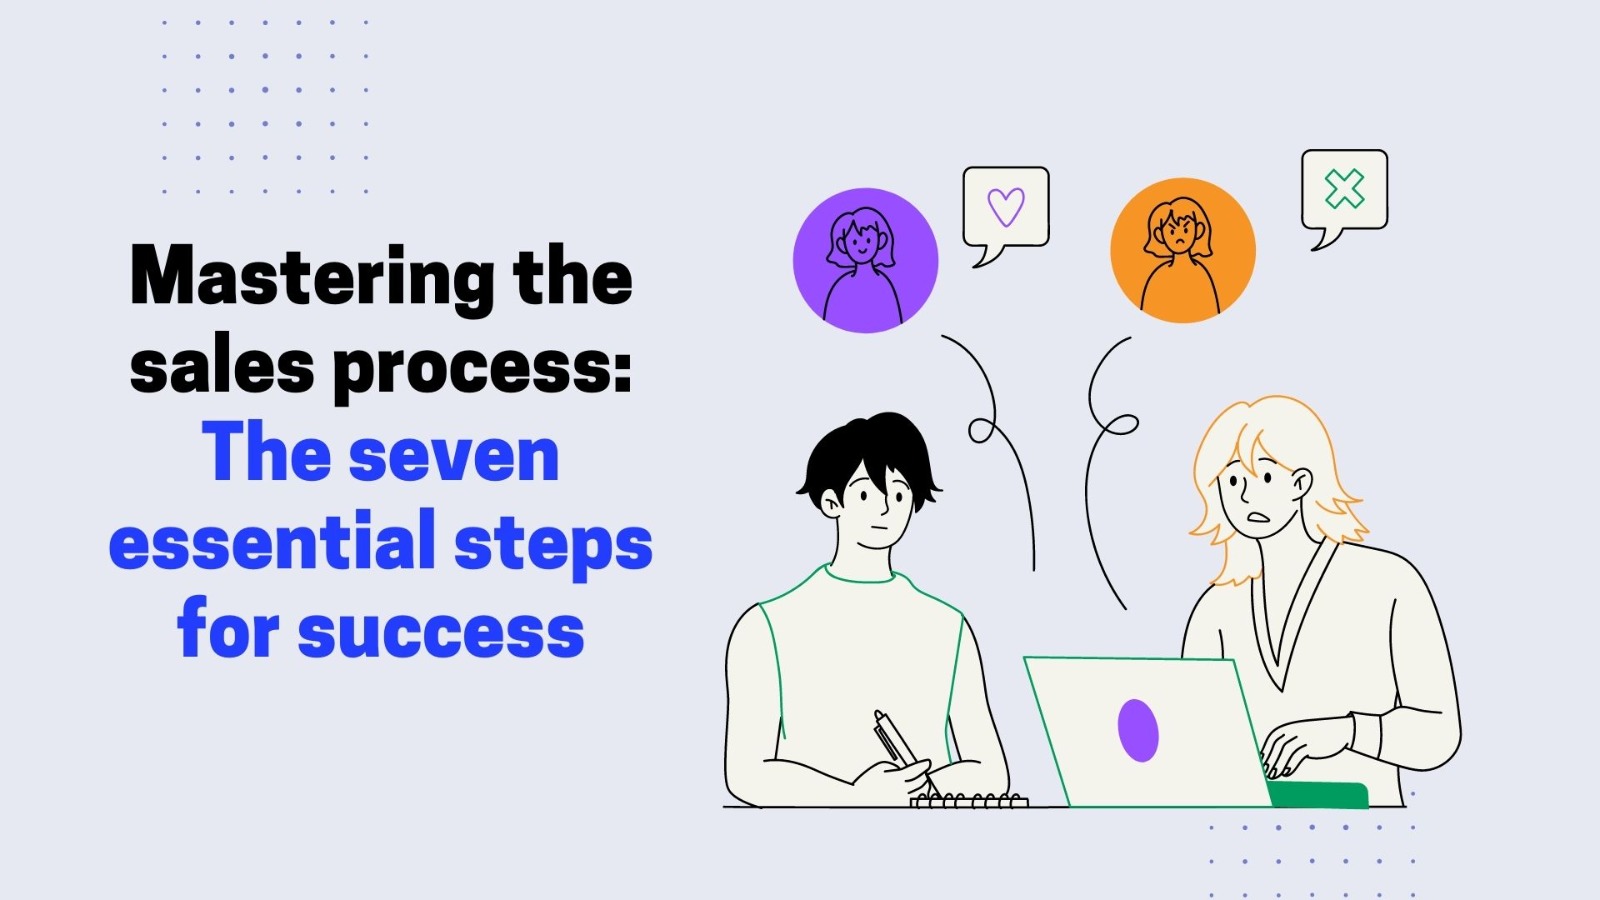 Mastering the sales process: The seven essential steps for success